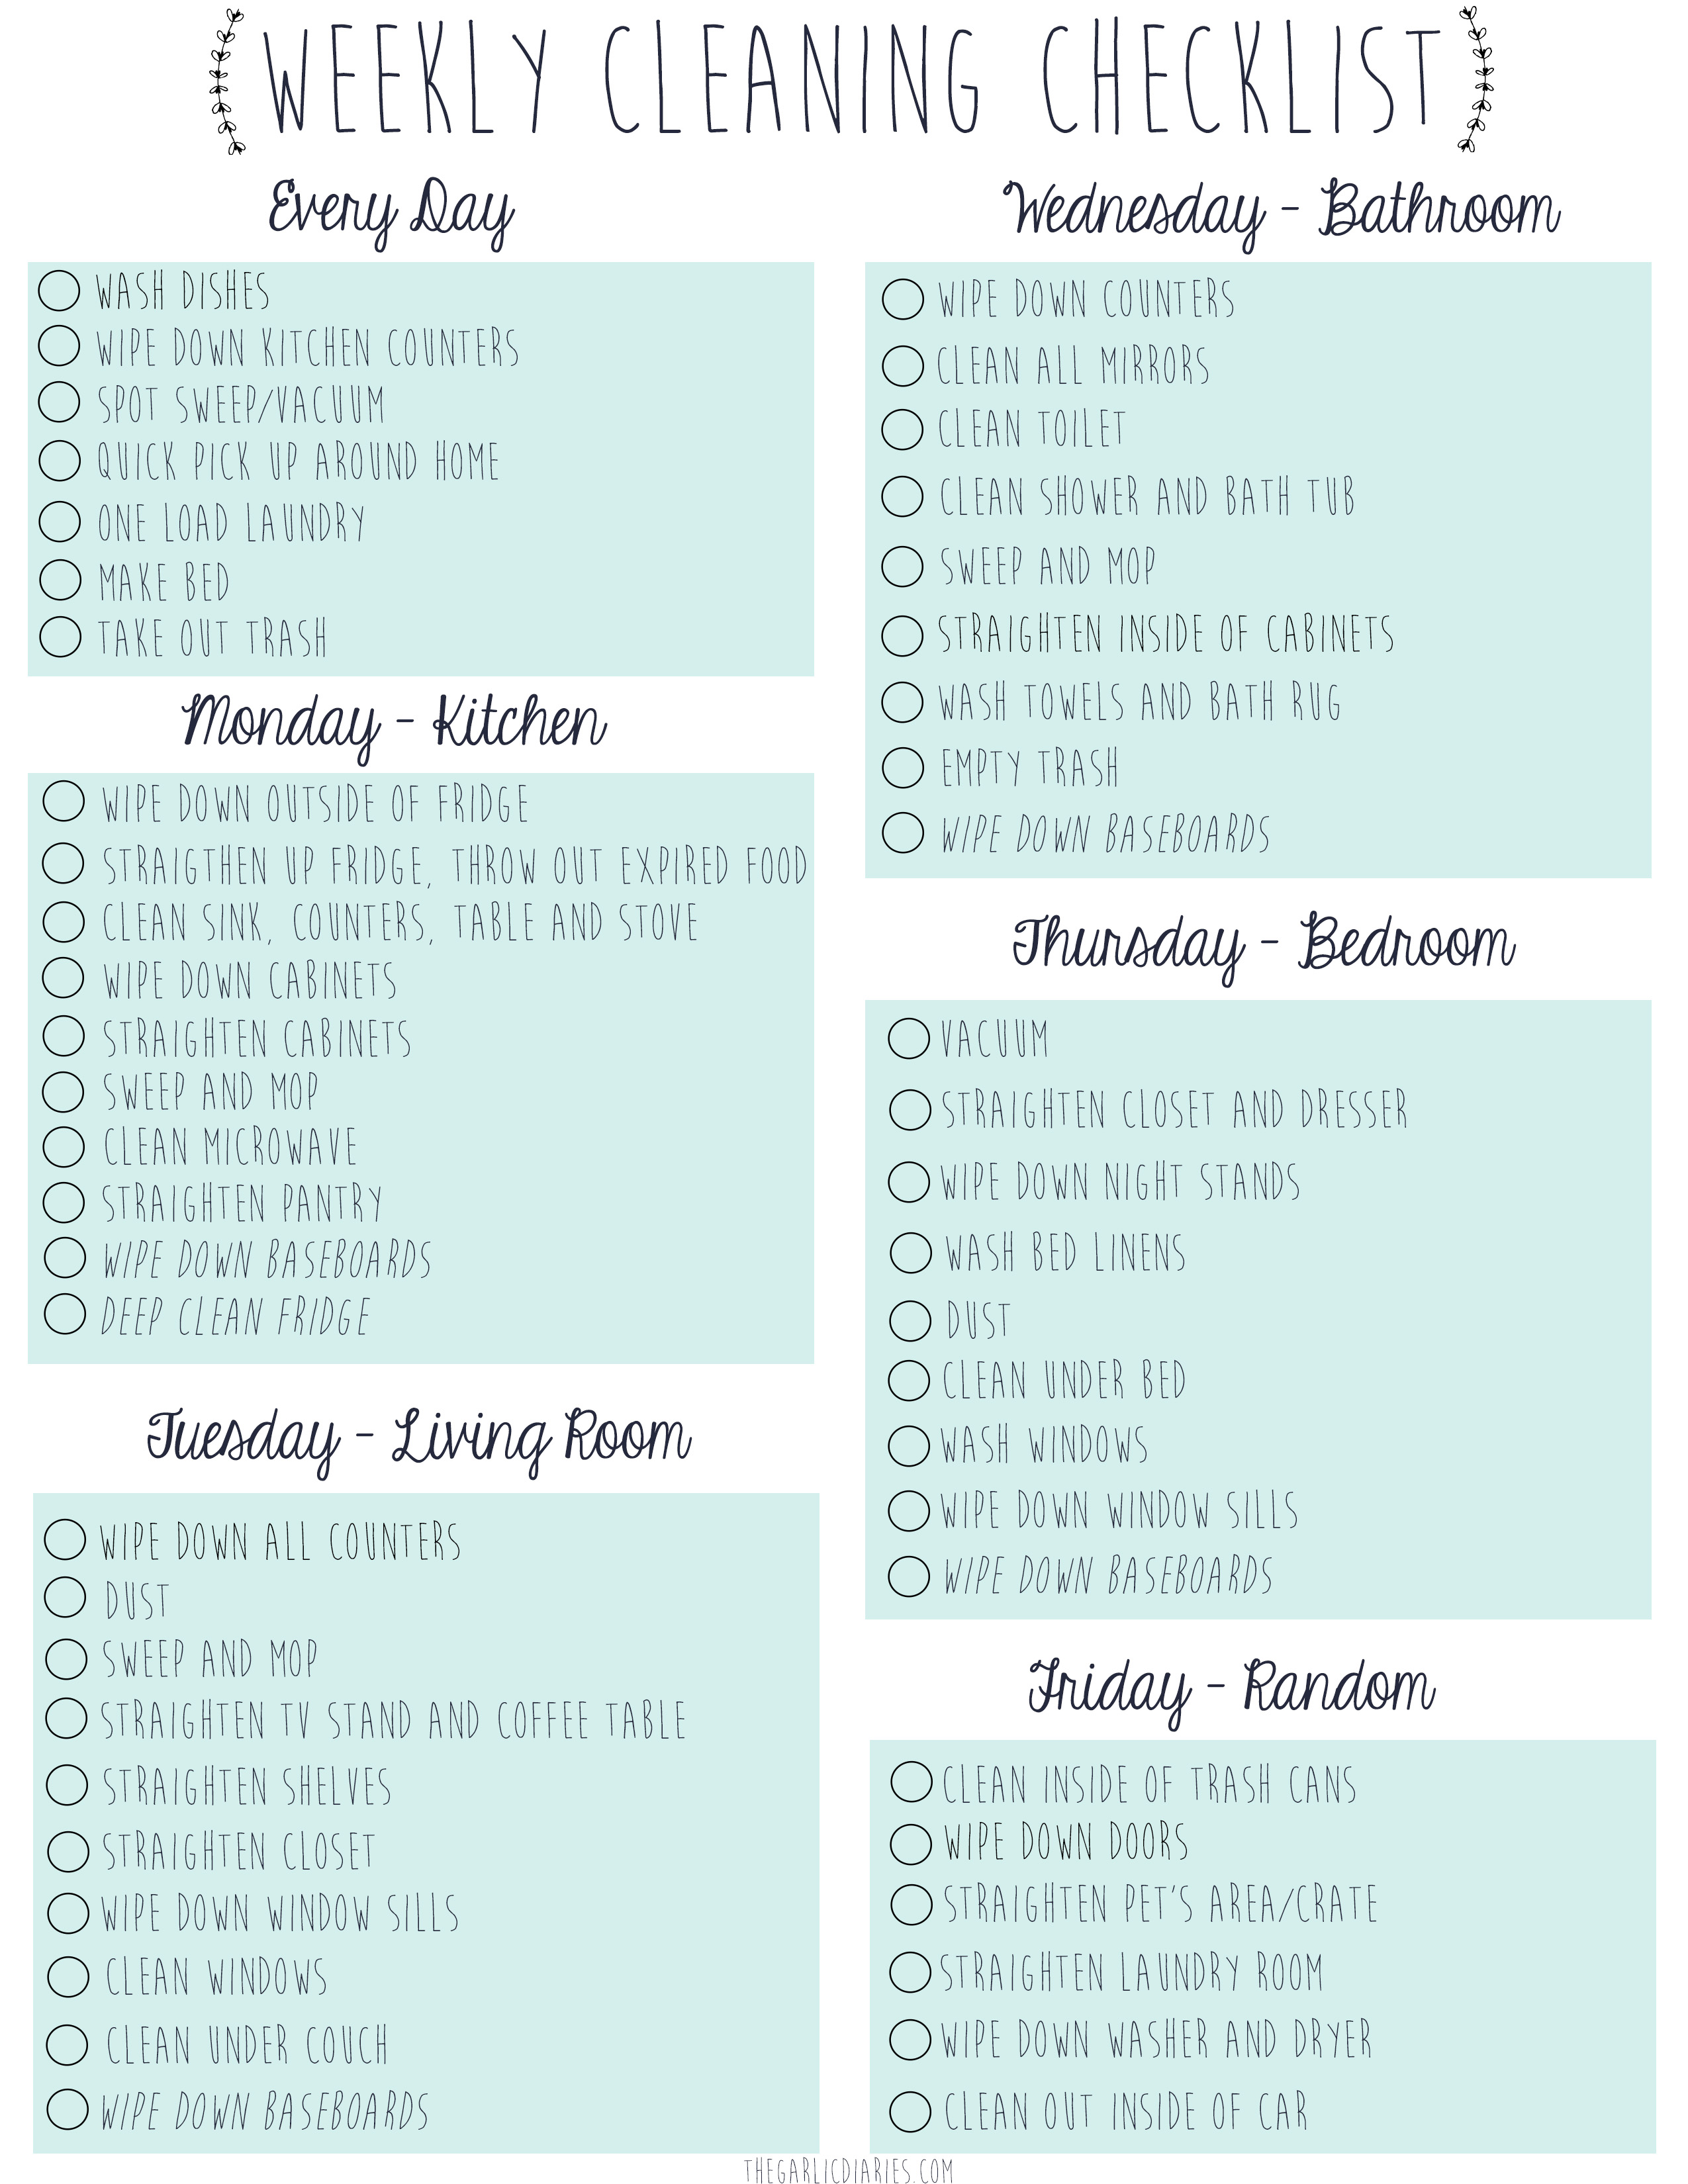 Weekly Cleaning Checklist 